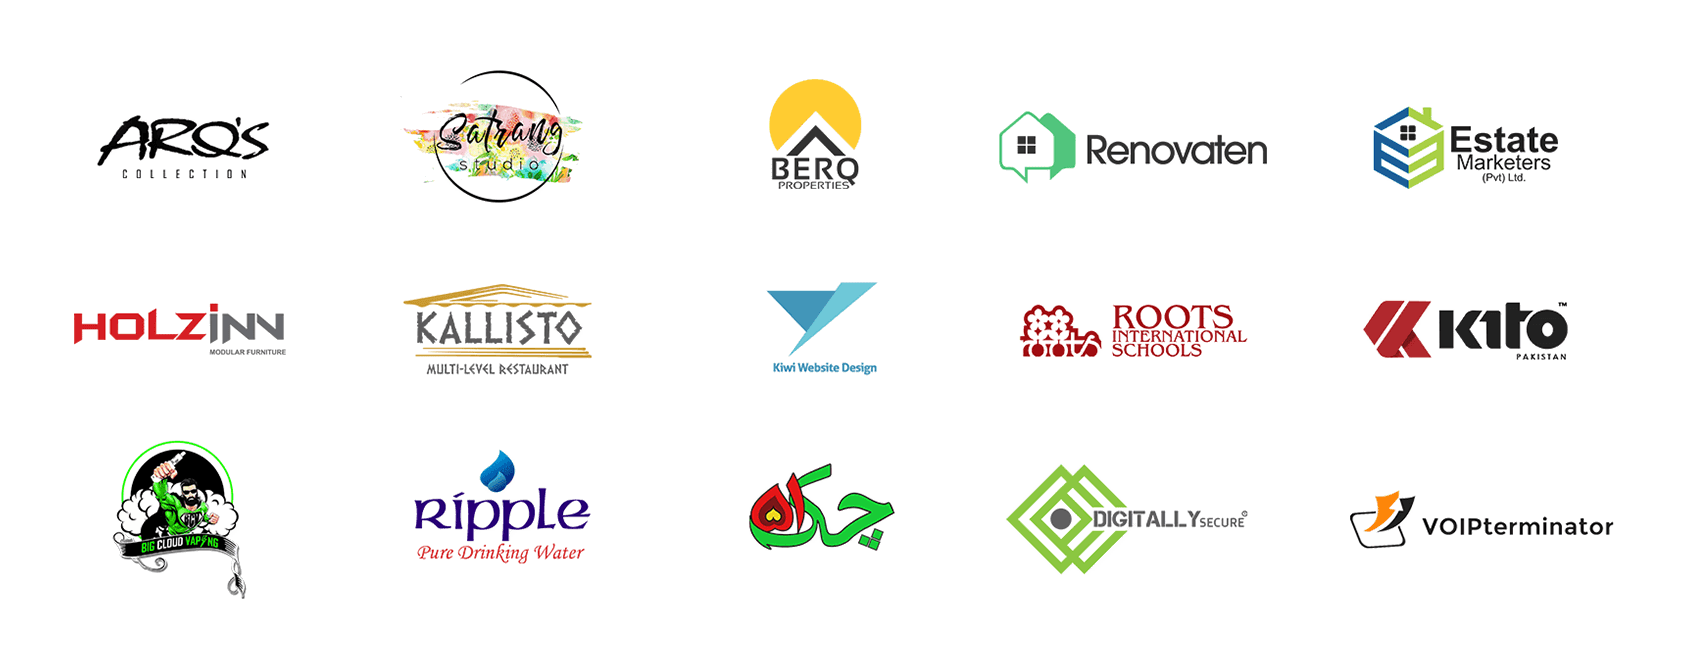 Digitally Up Client Logos - About Us